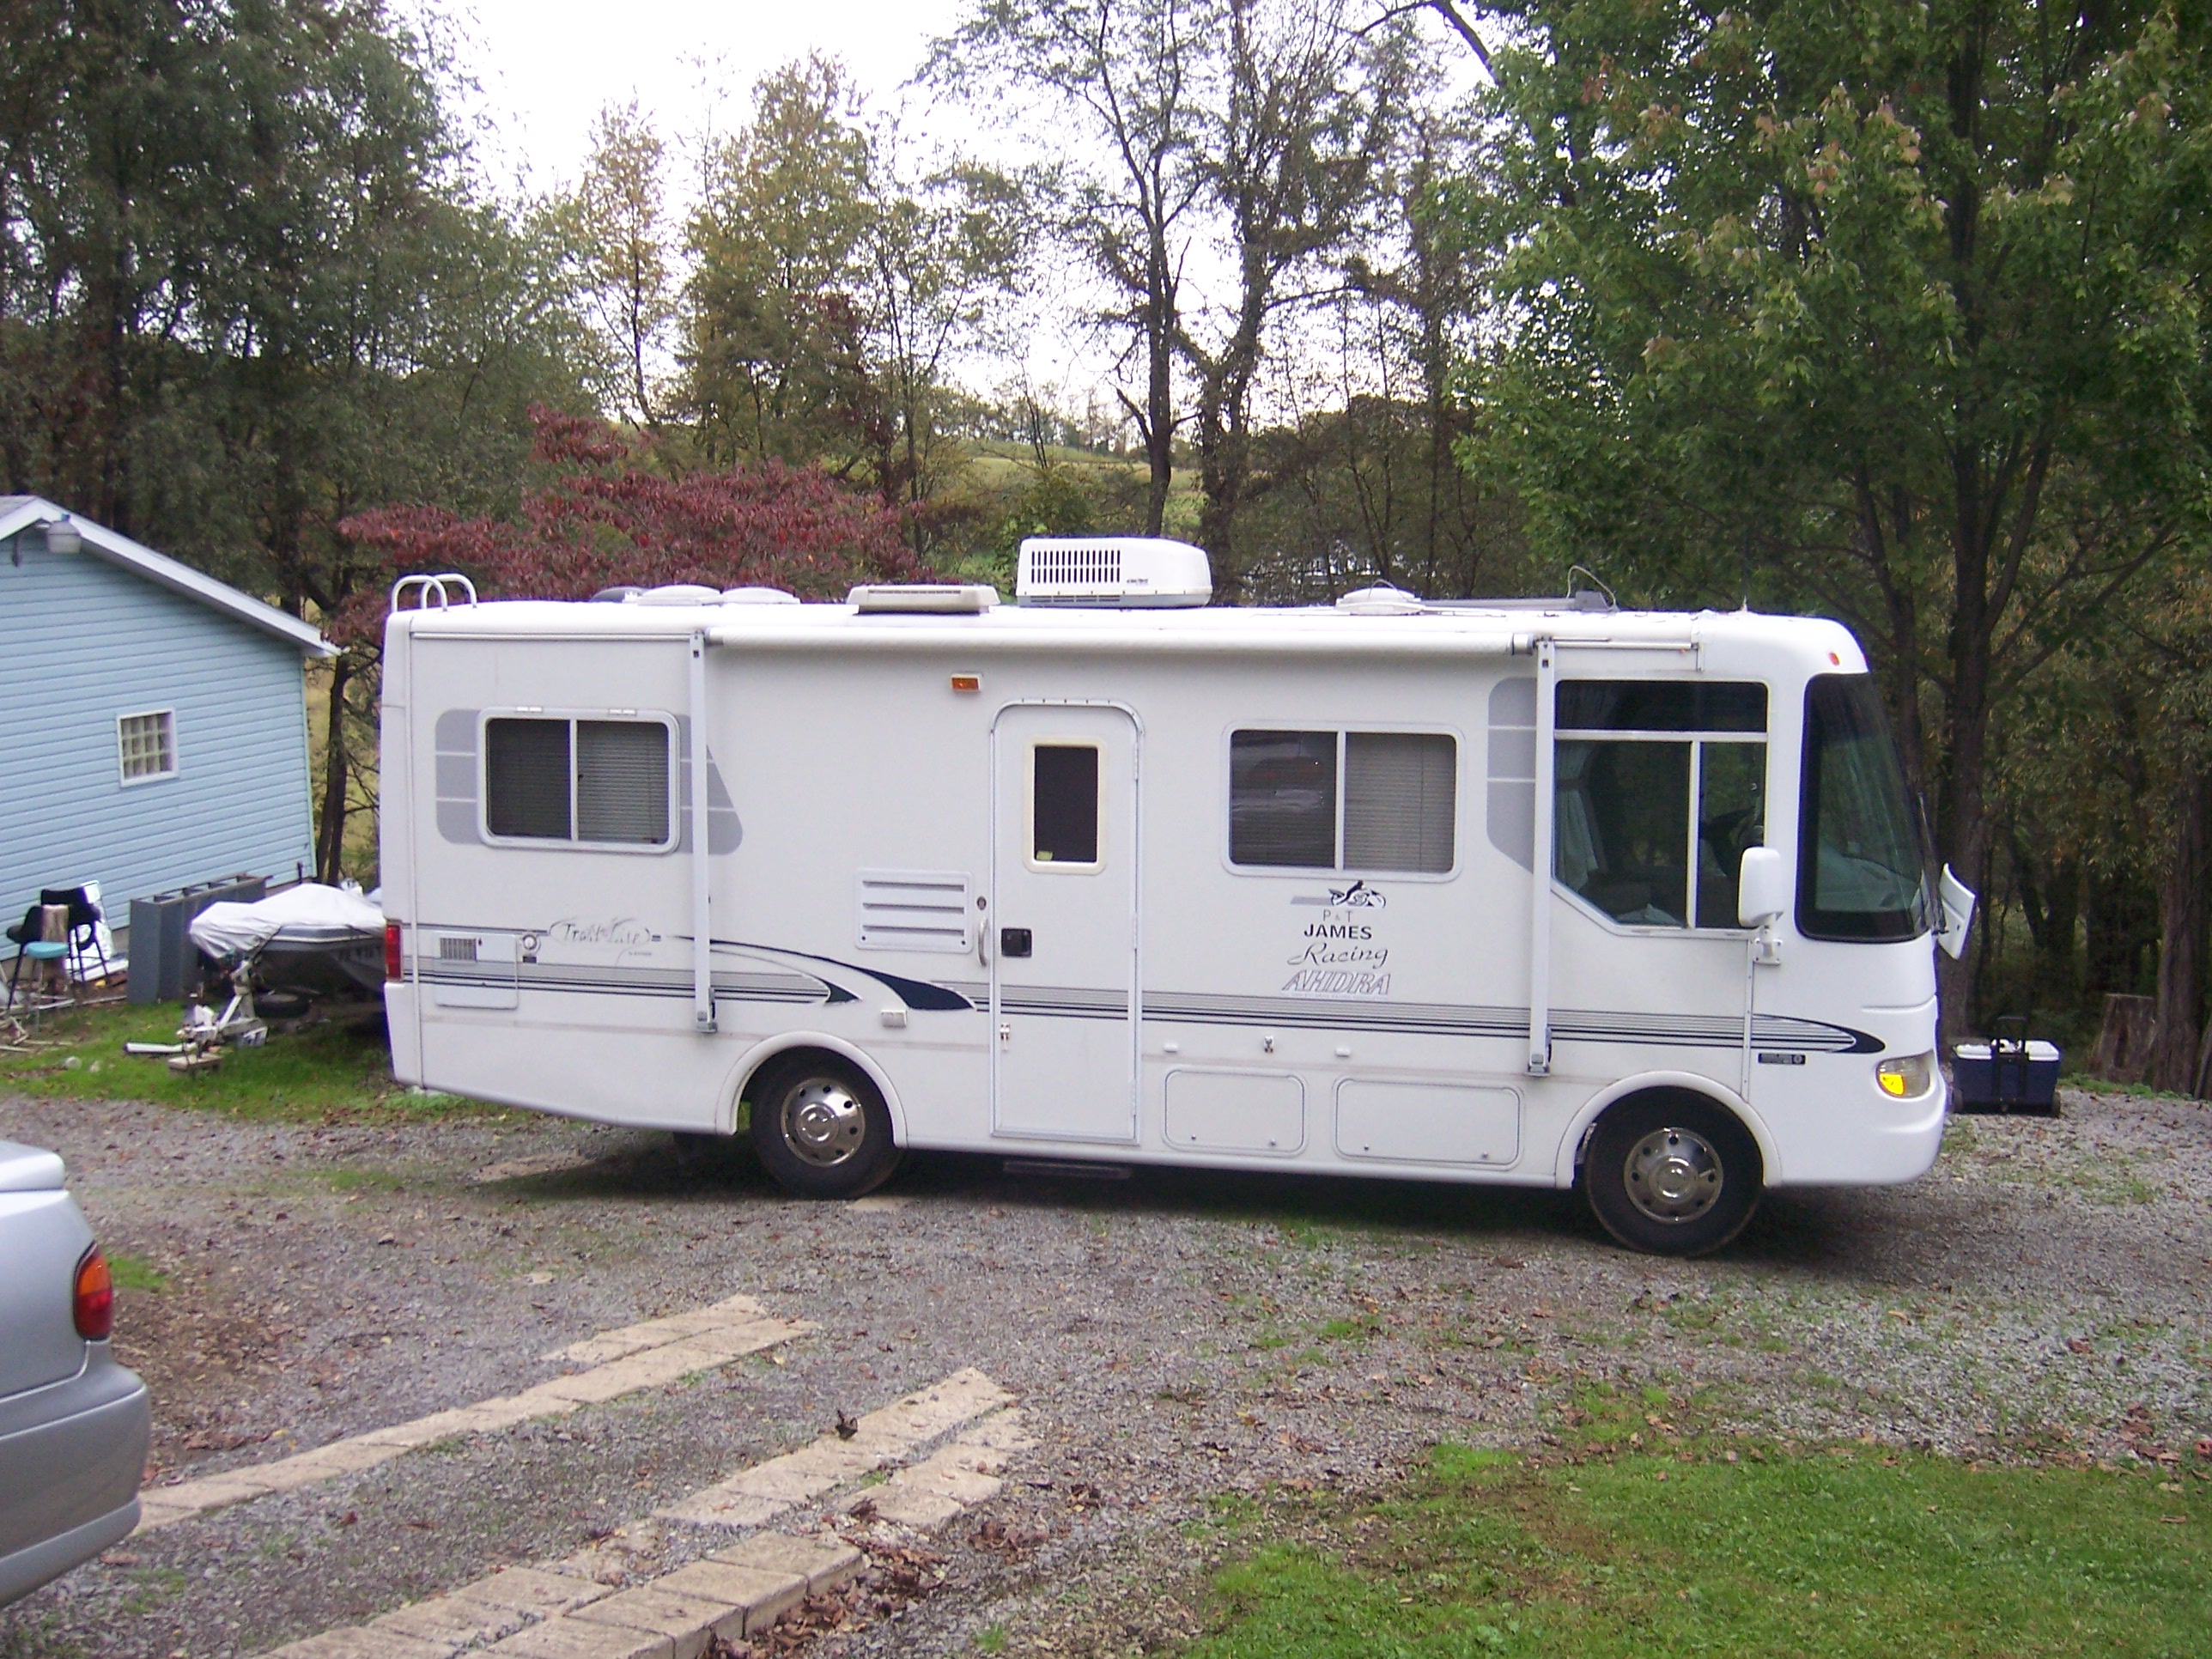 Attached picture matts motorhome and mine 006.JPG